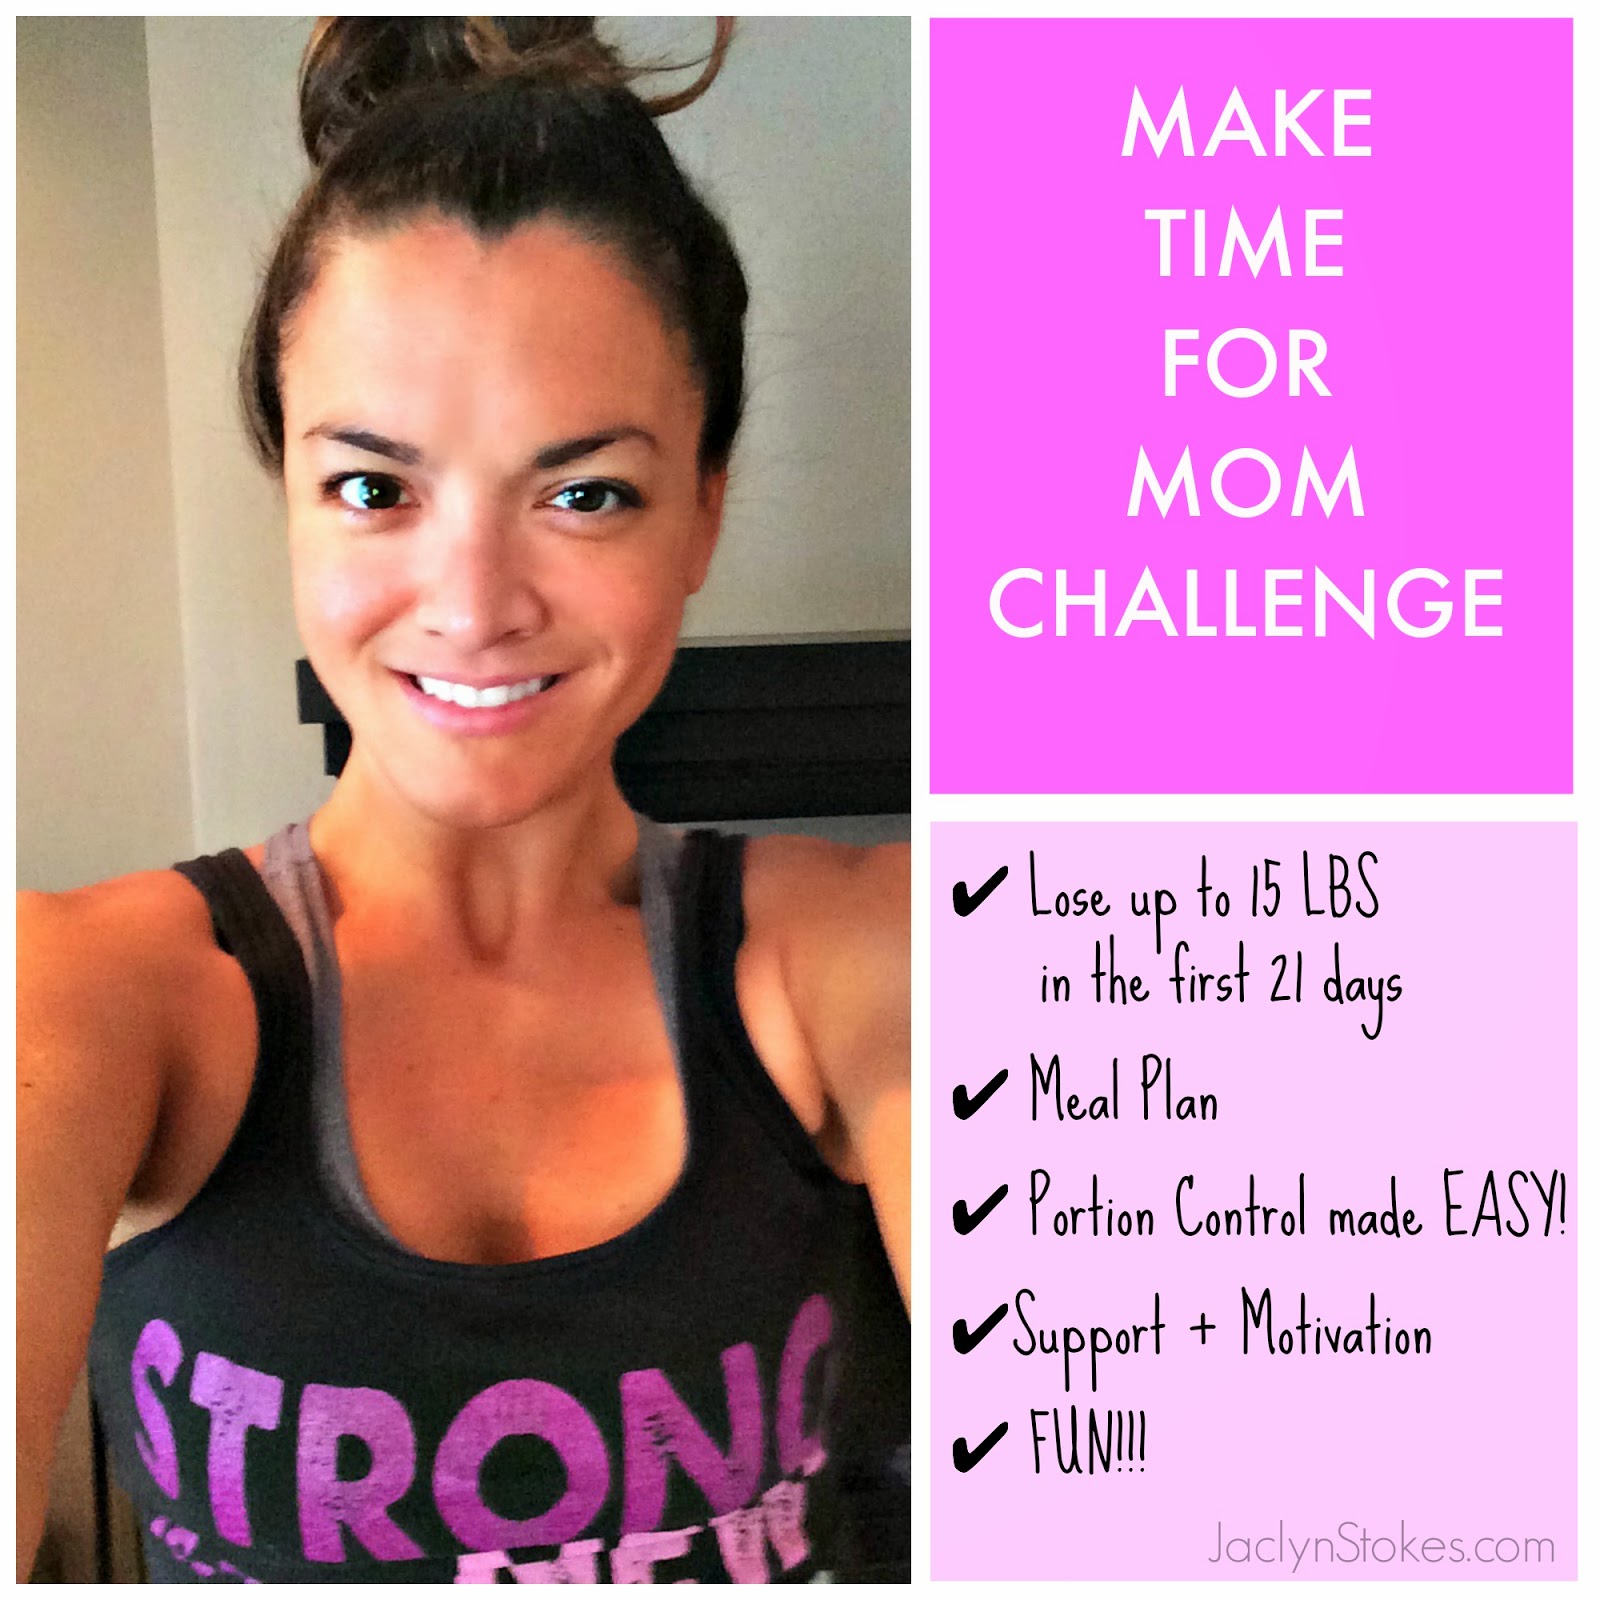 21 Day Fix, clean eating, portion control, shakeology, beachbody, challenge group 